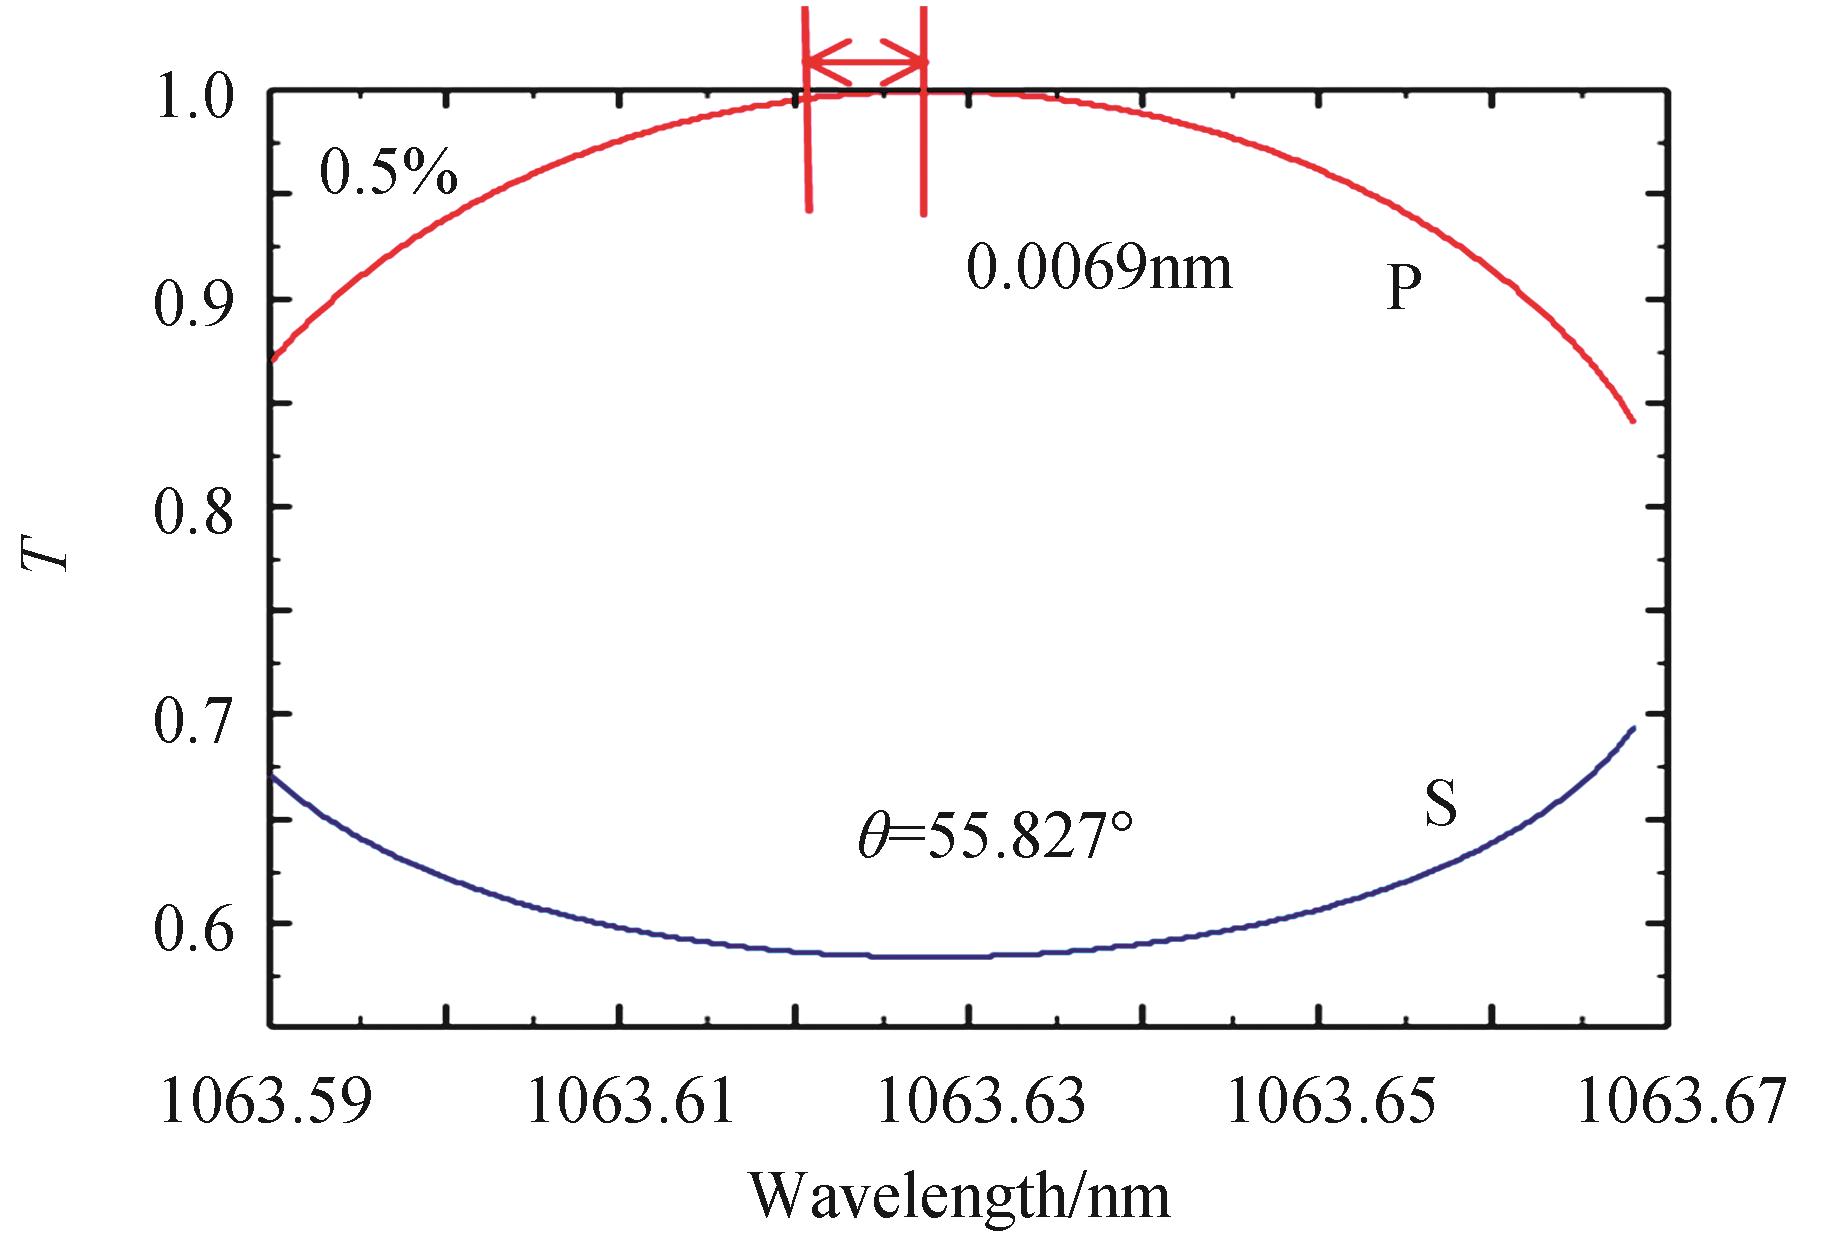 1064 nm wavelength transmission as a function of wavelength